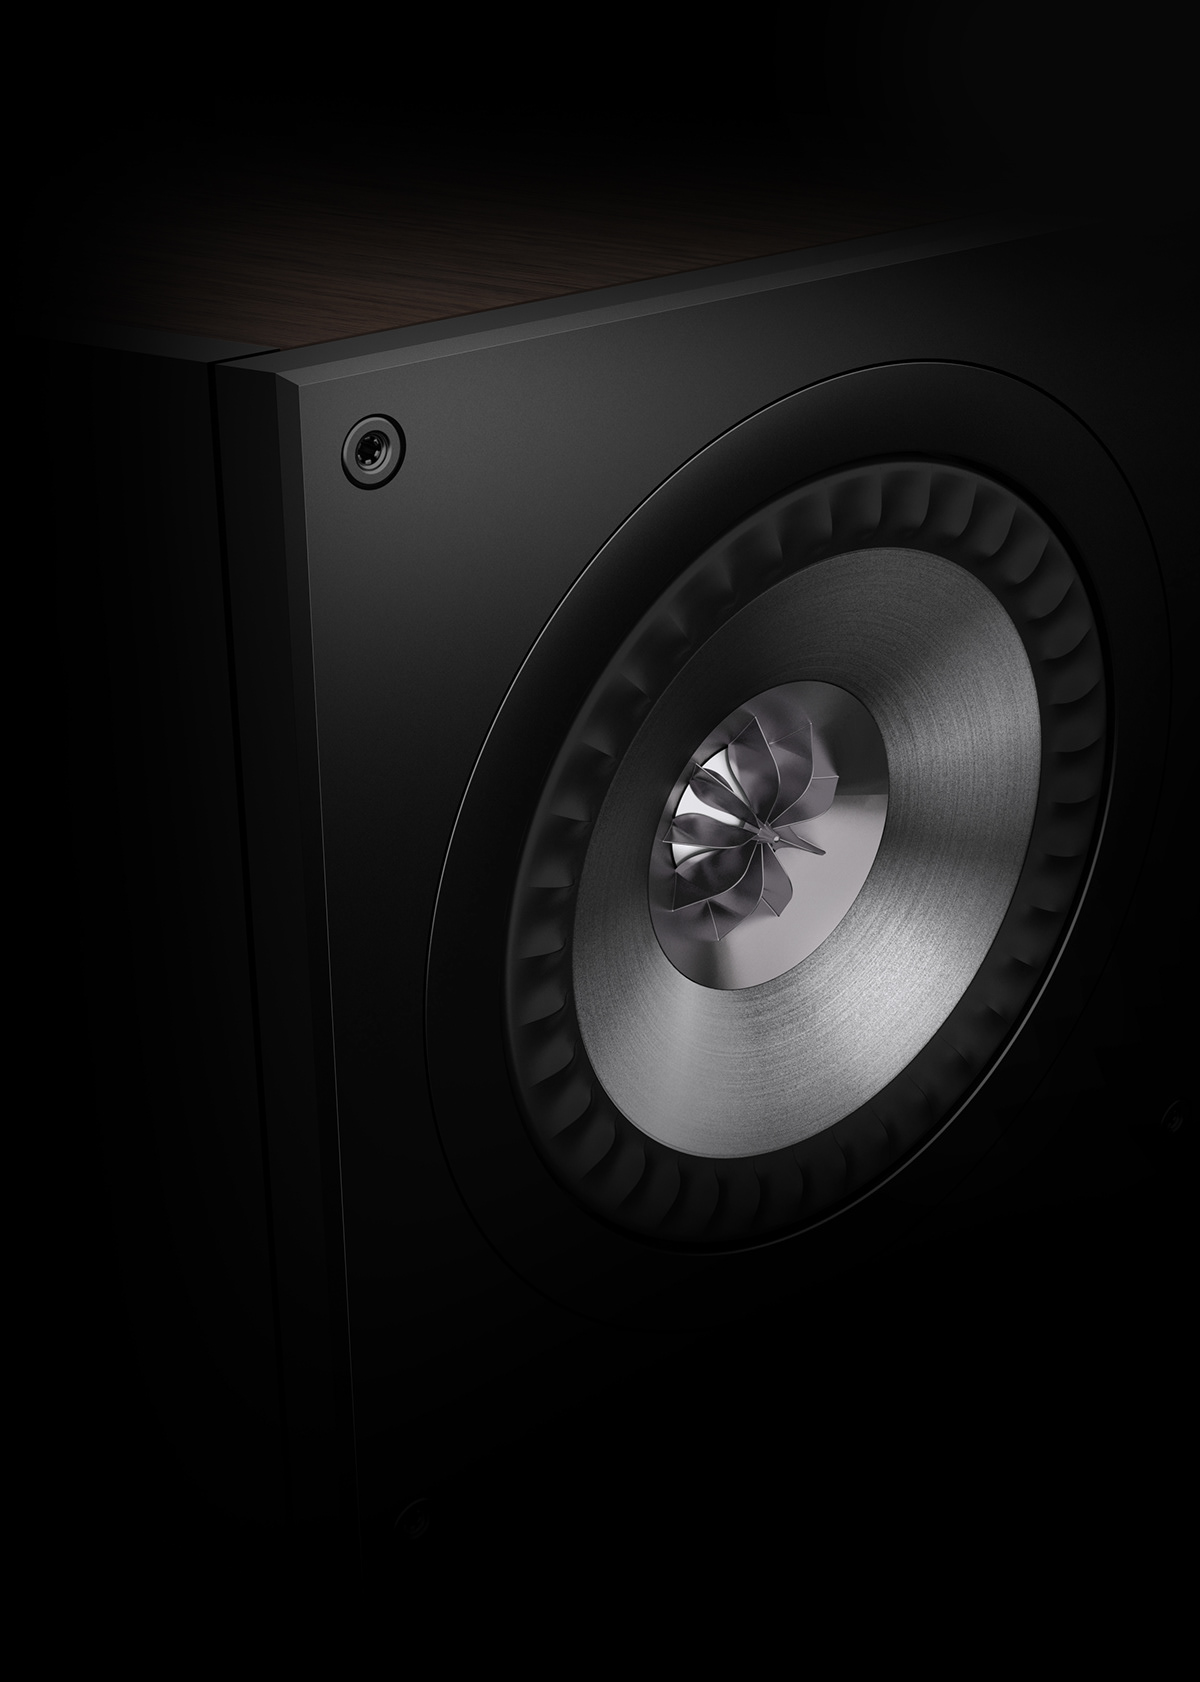 KEF virtual photography vray Rhino 3D photoshop speakers